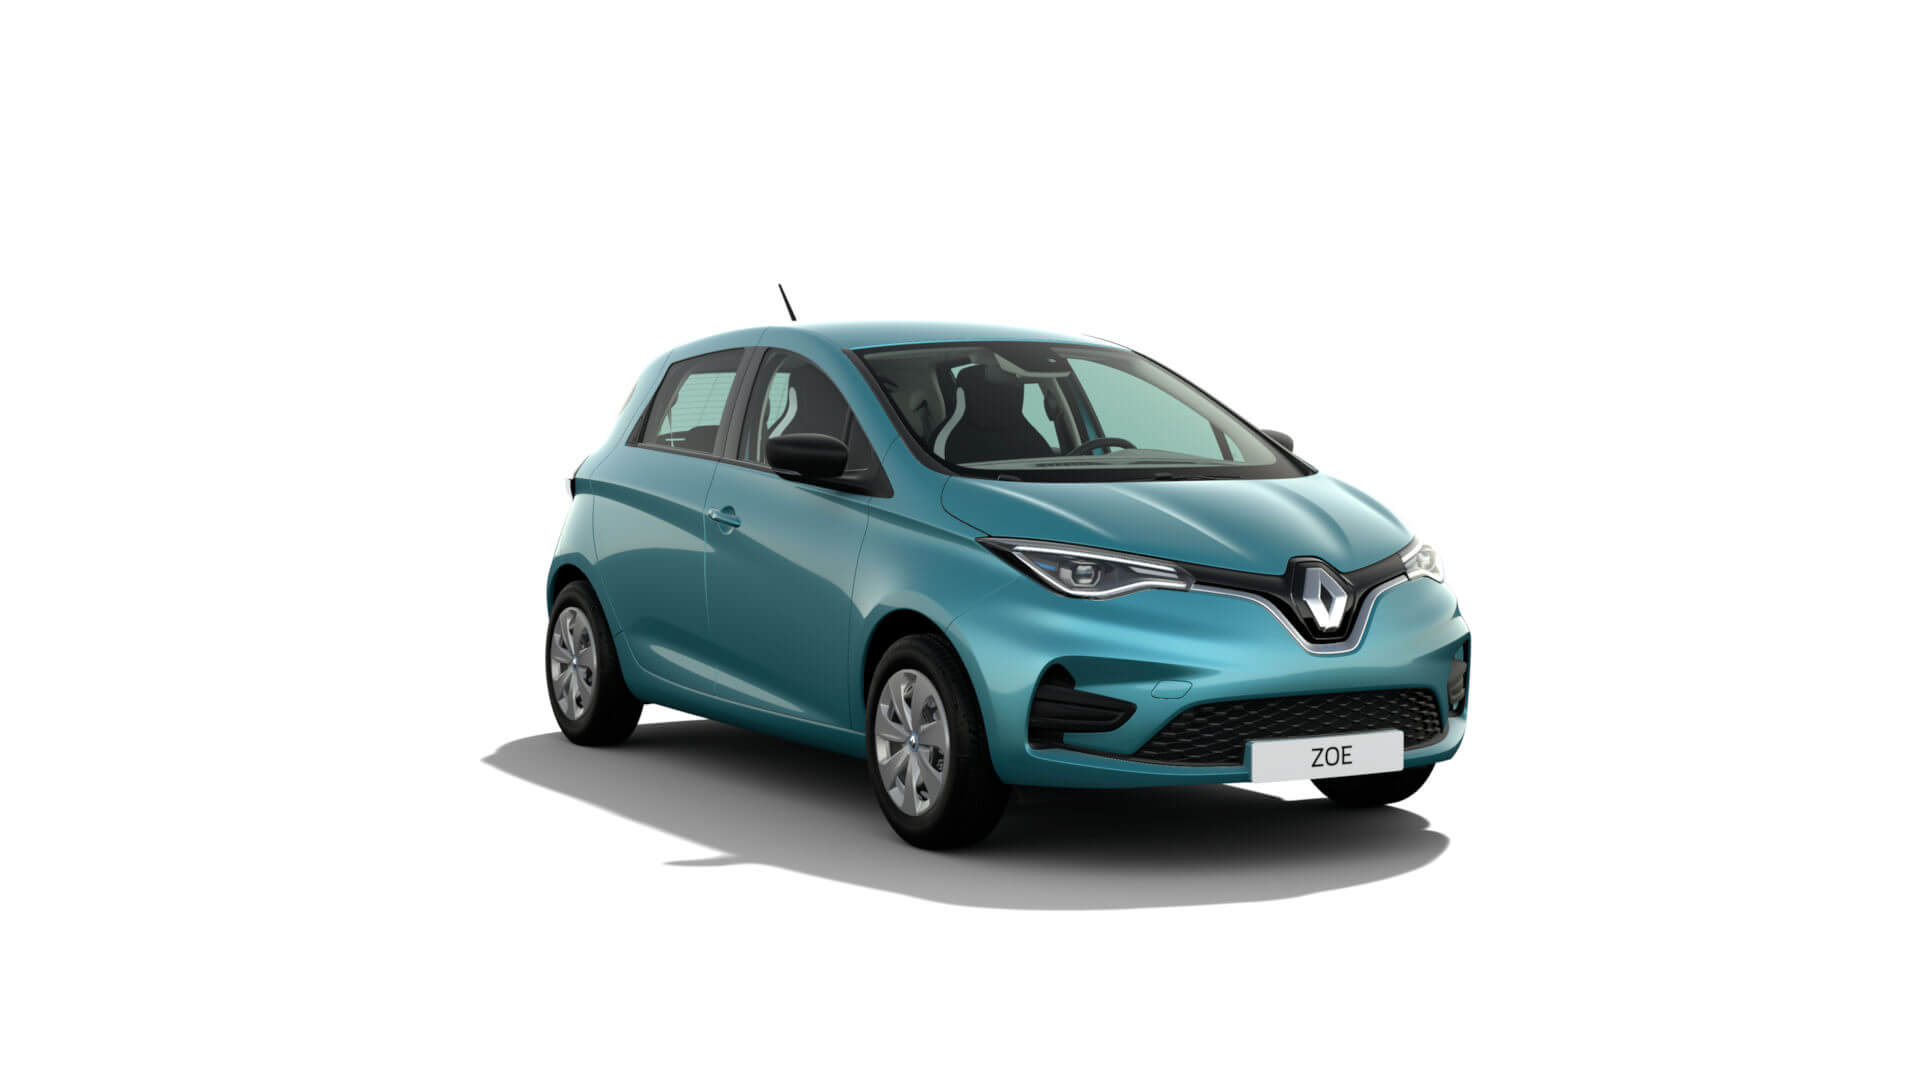 Automodell Türkis - Renault Zoe - Renault Ahrens Hannover